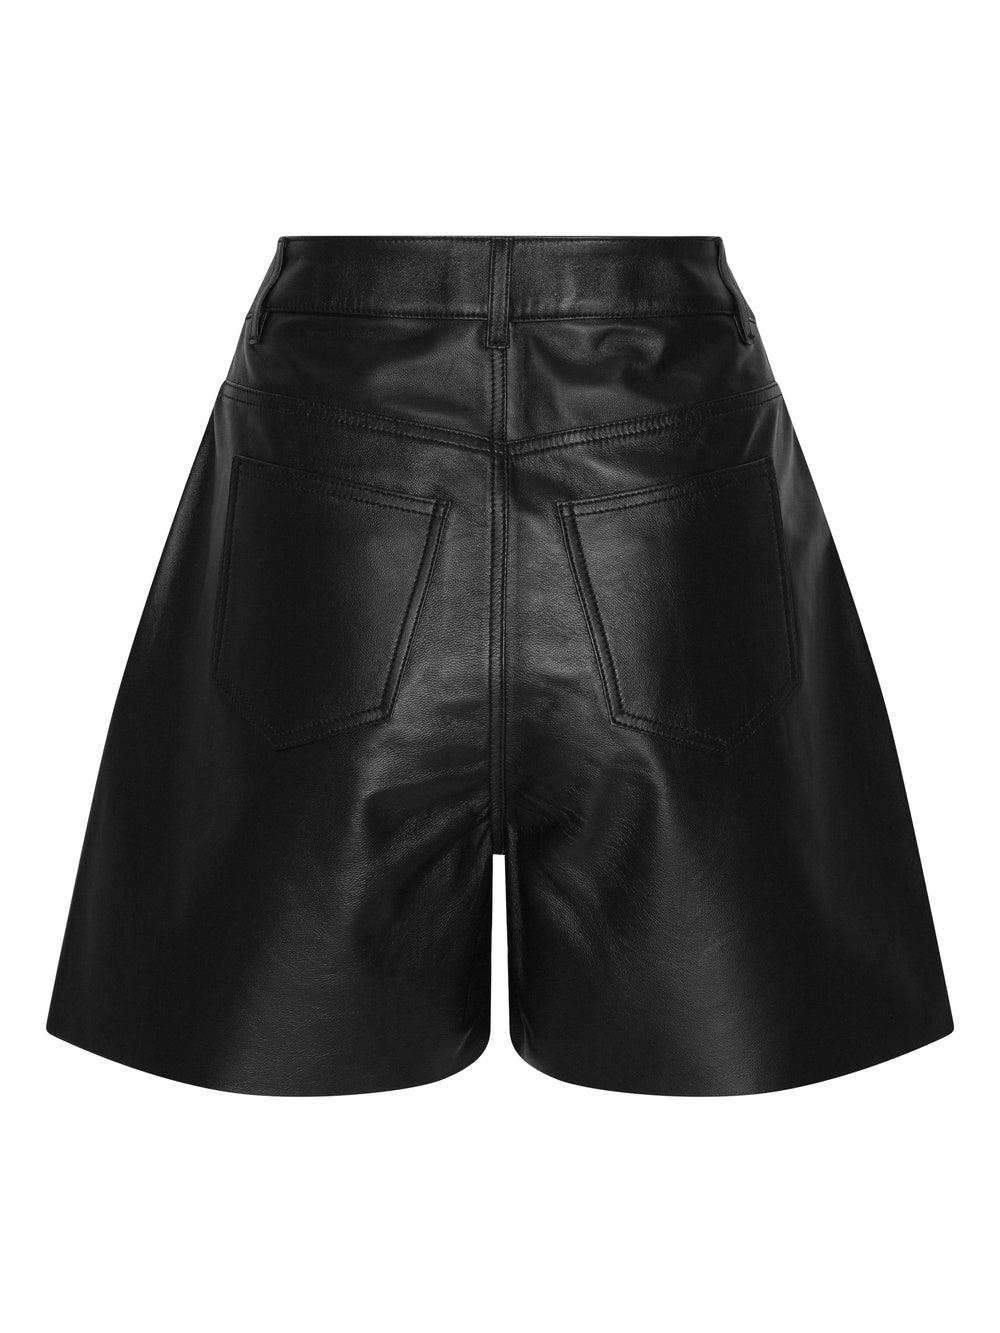 custommade - Nava Black Leather Shorts - 32 The Guild